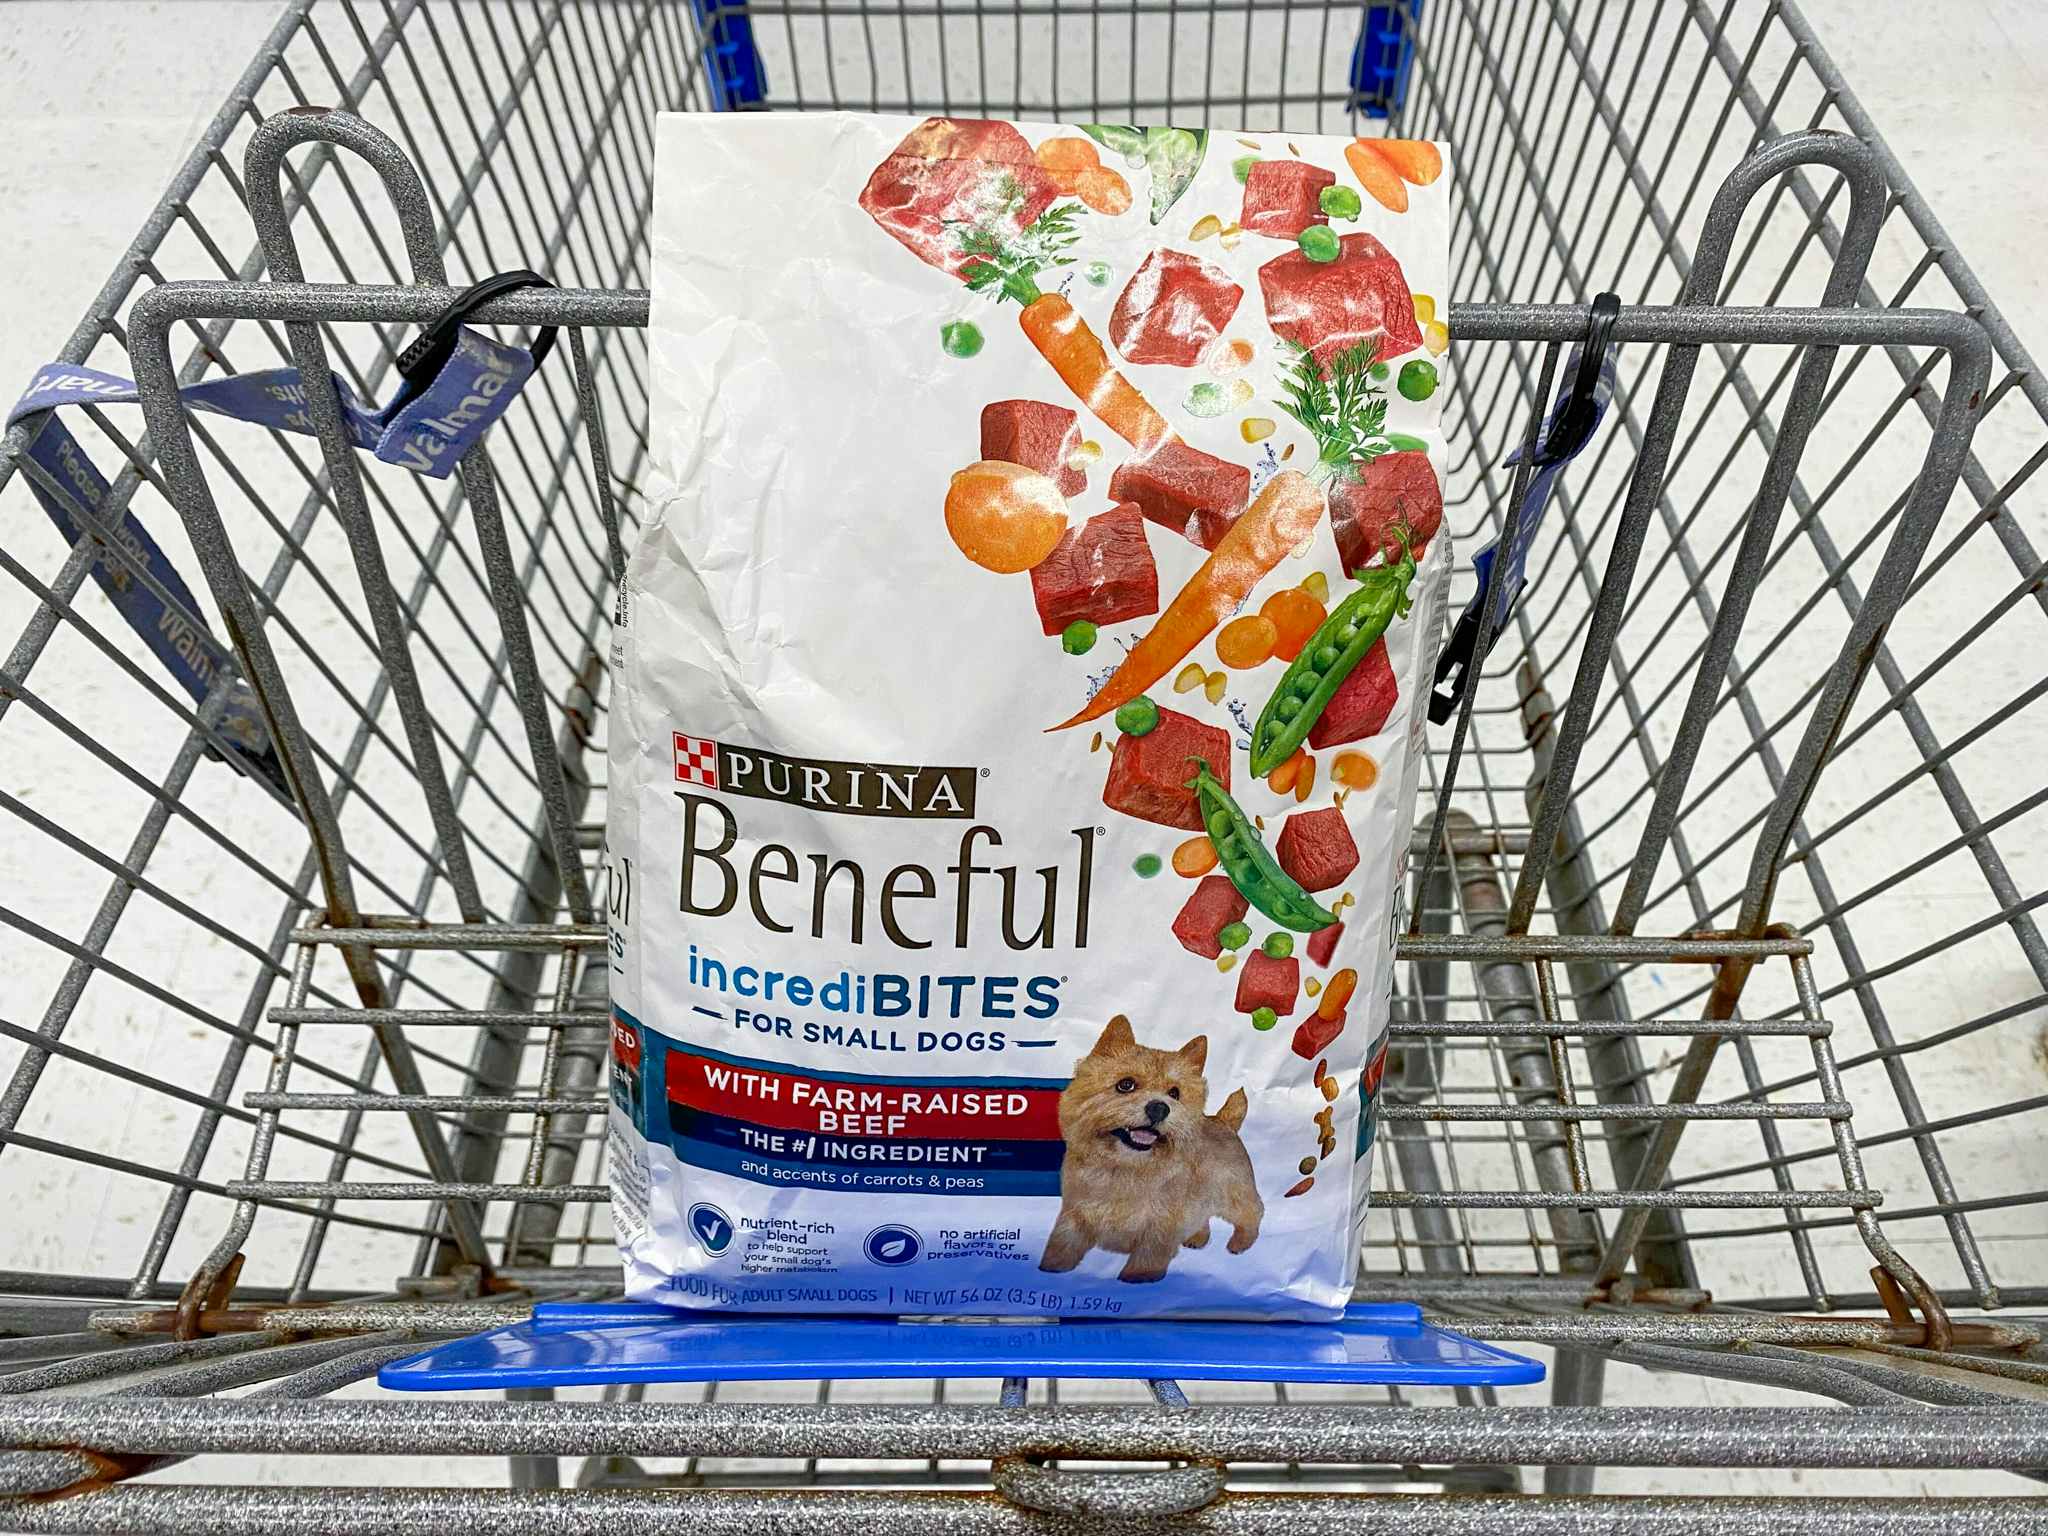 A bag of Purina Beneful incrediBITES for small dogs sitting in the basket of a Walmart shopping cart.